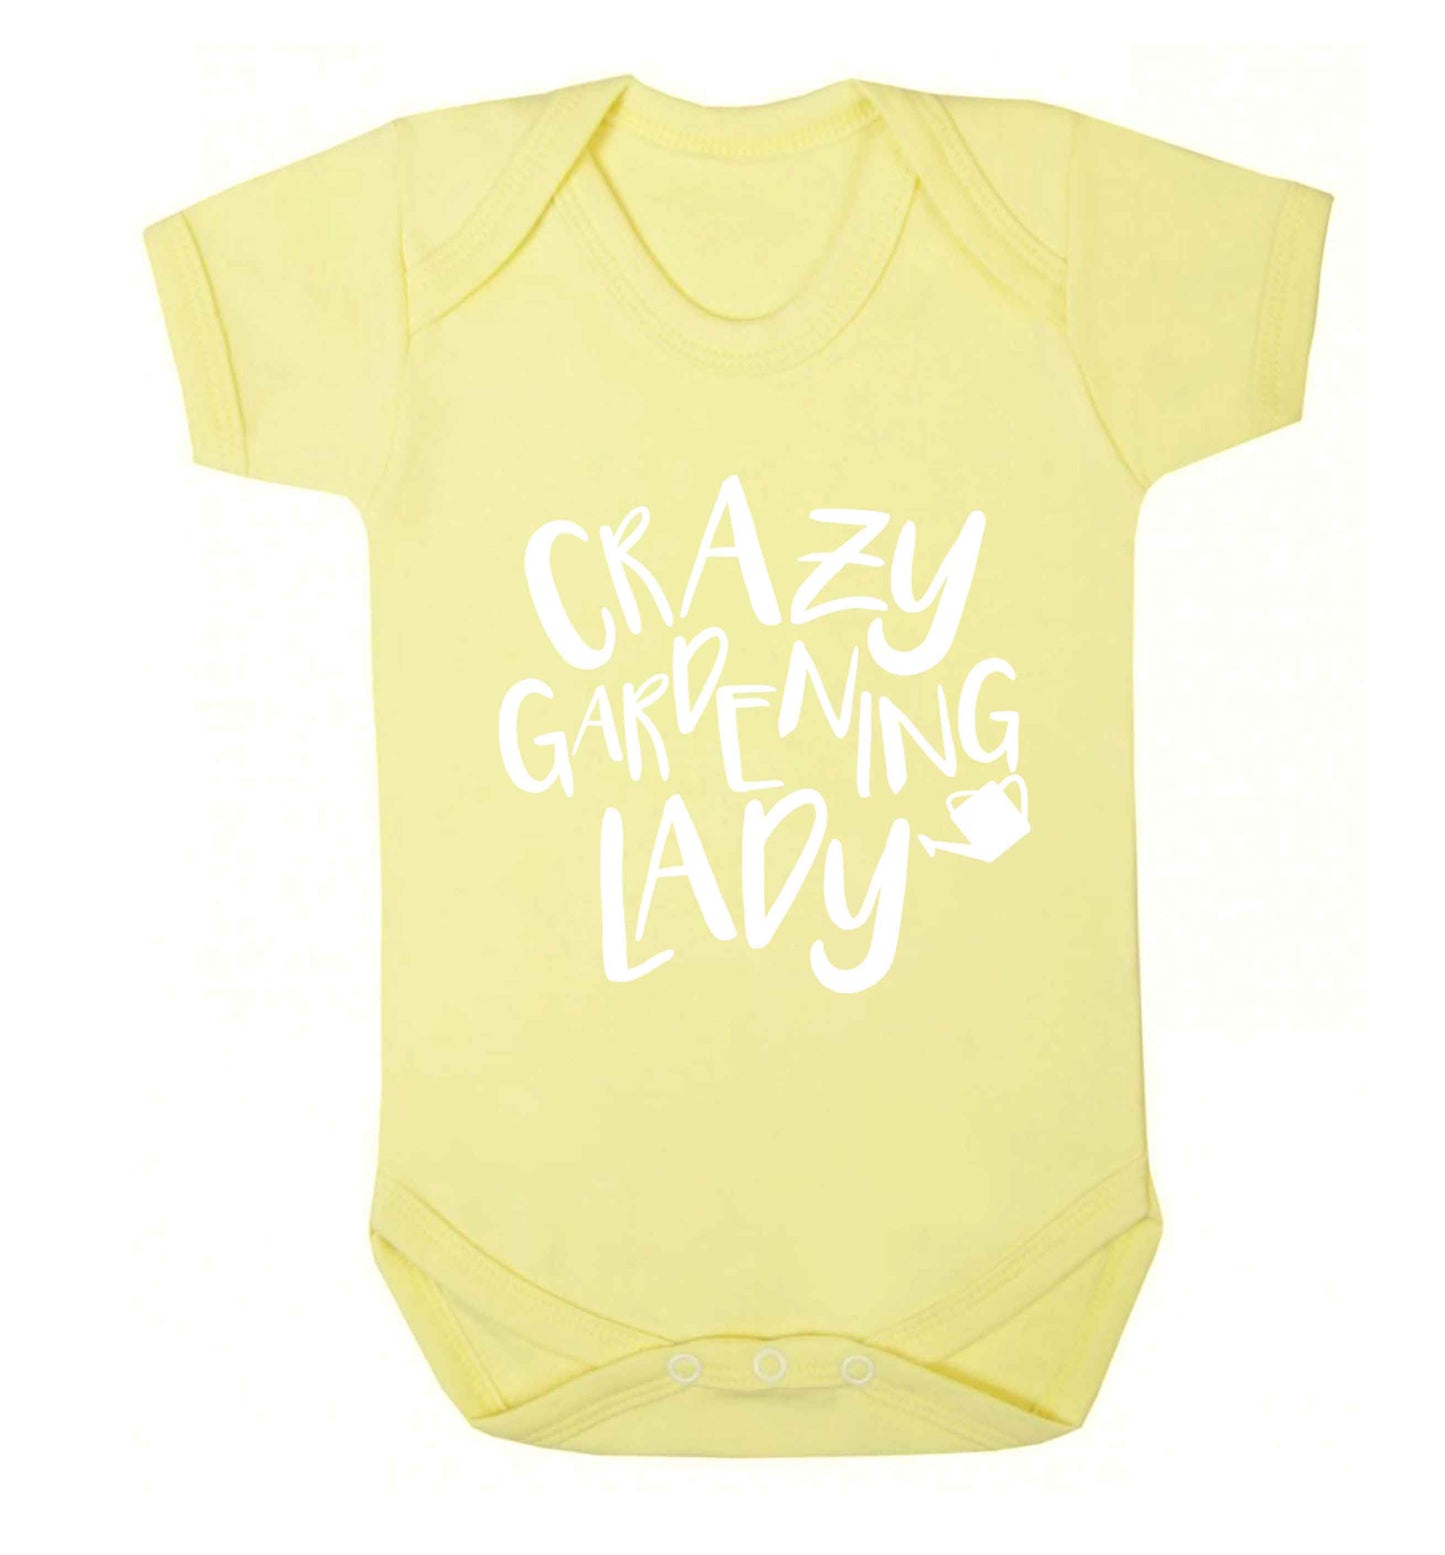 Crazy gardening lady Baby Vest pale yellow 18-24 months